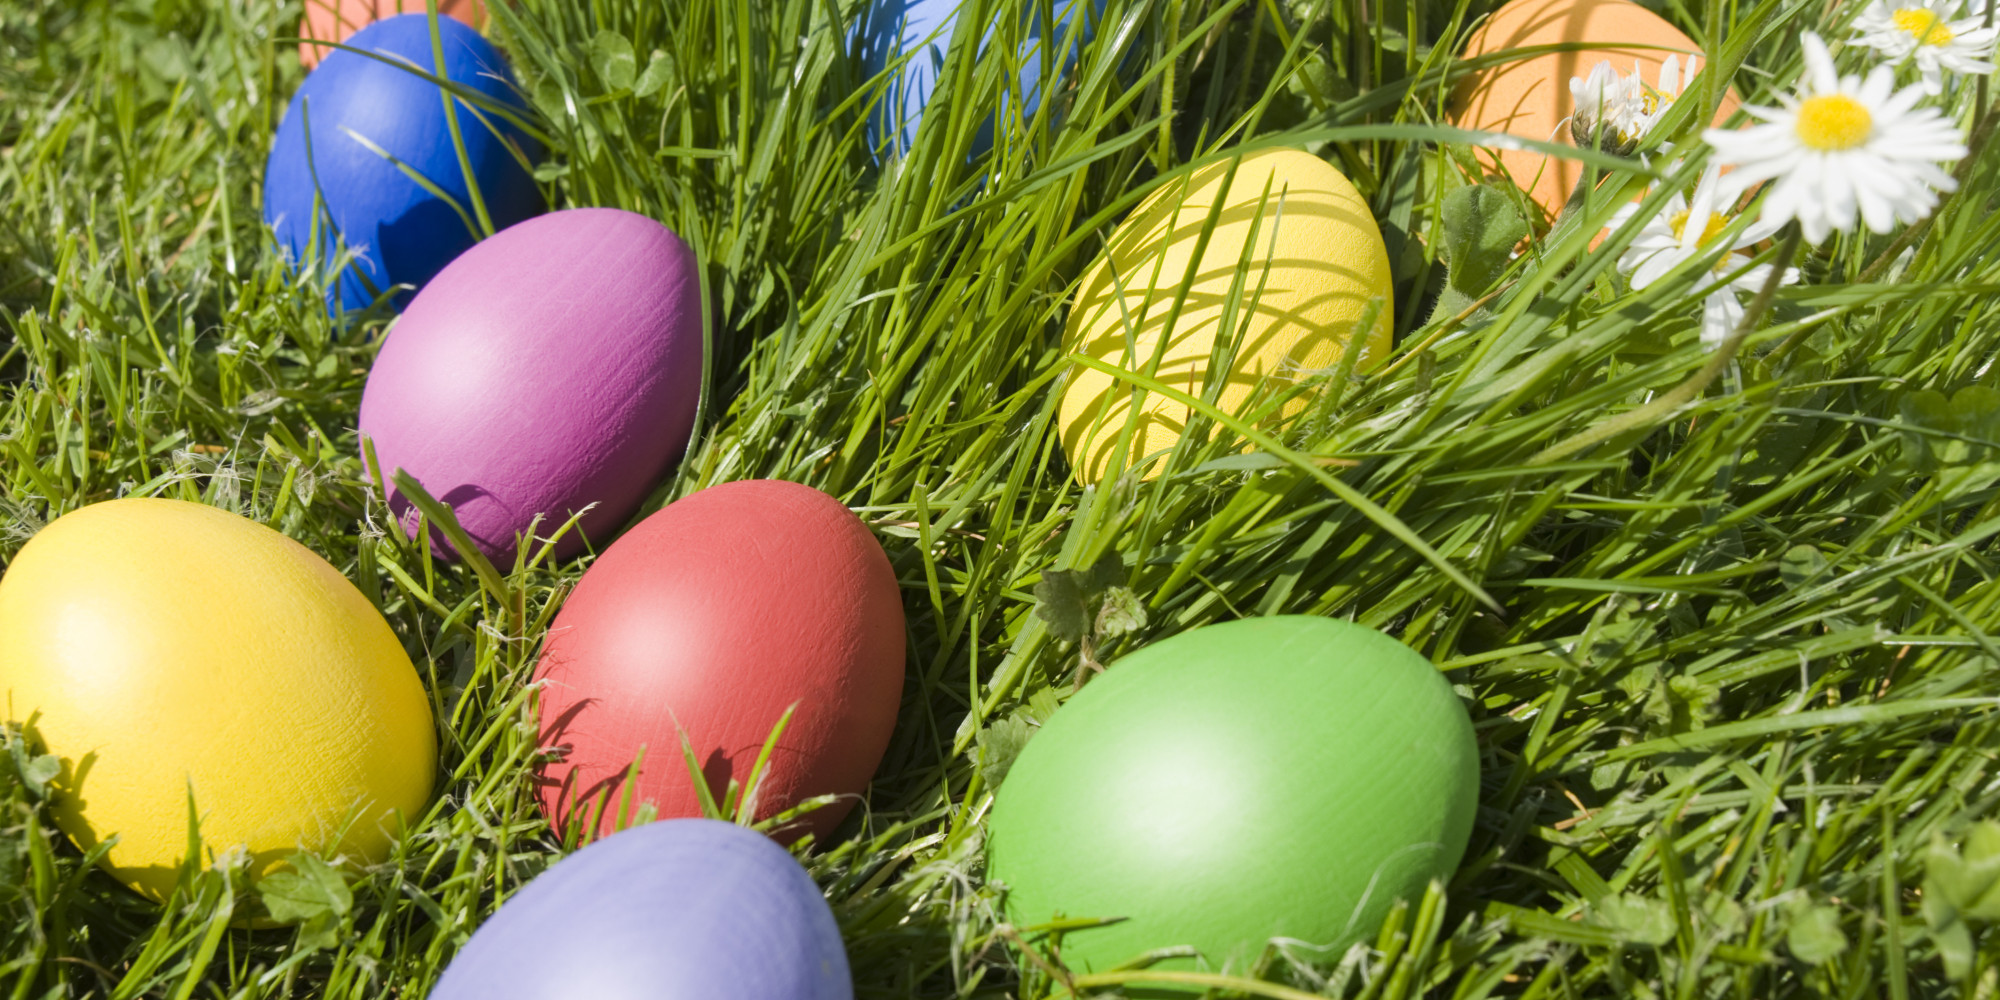 Woman Finds Dead Body During Easter Egg Hunt | HuffPost